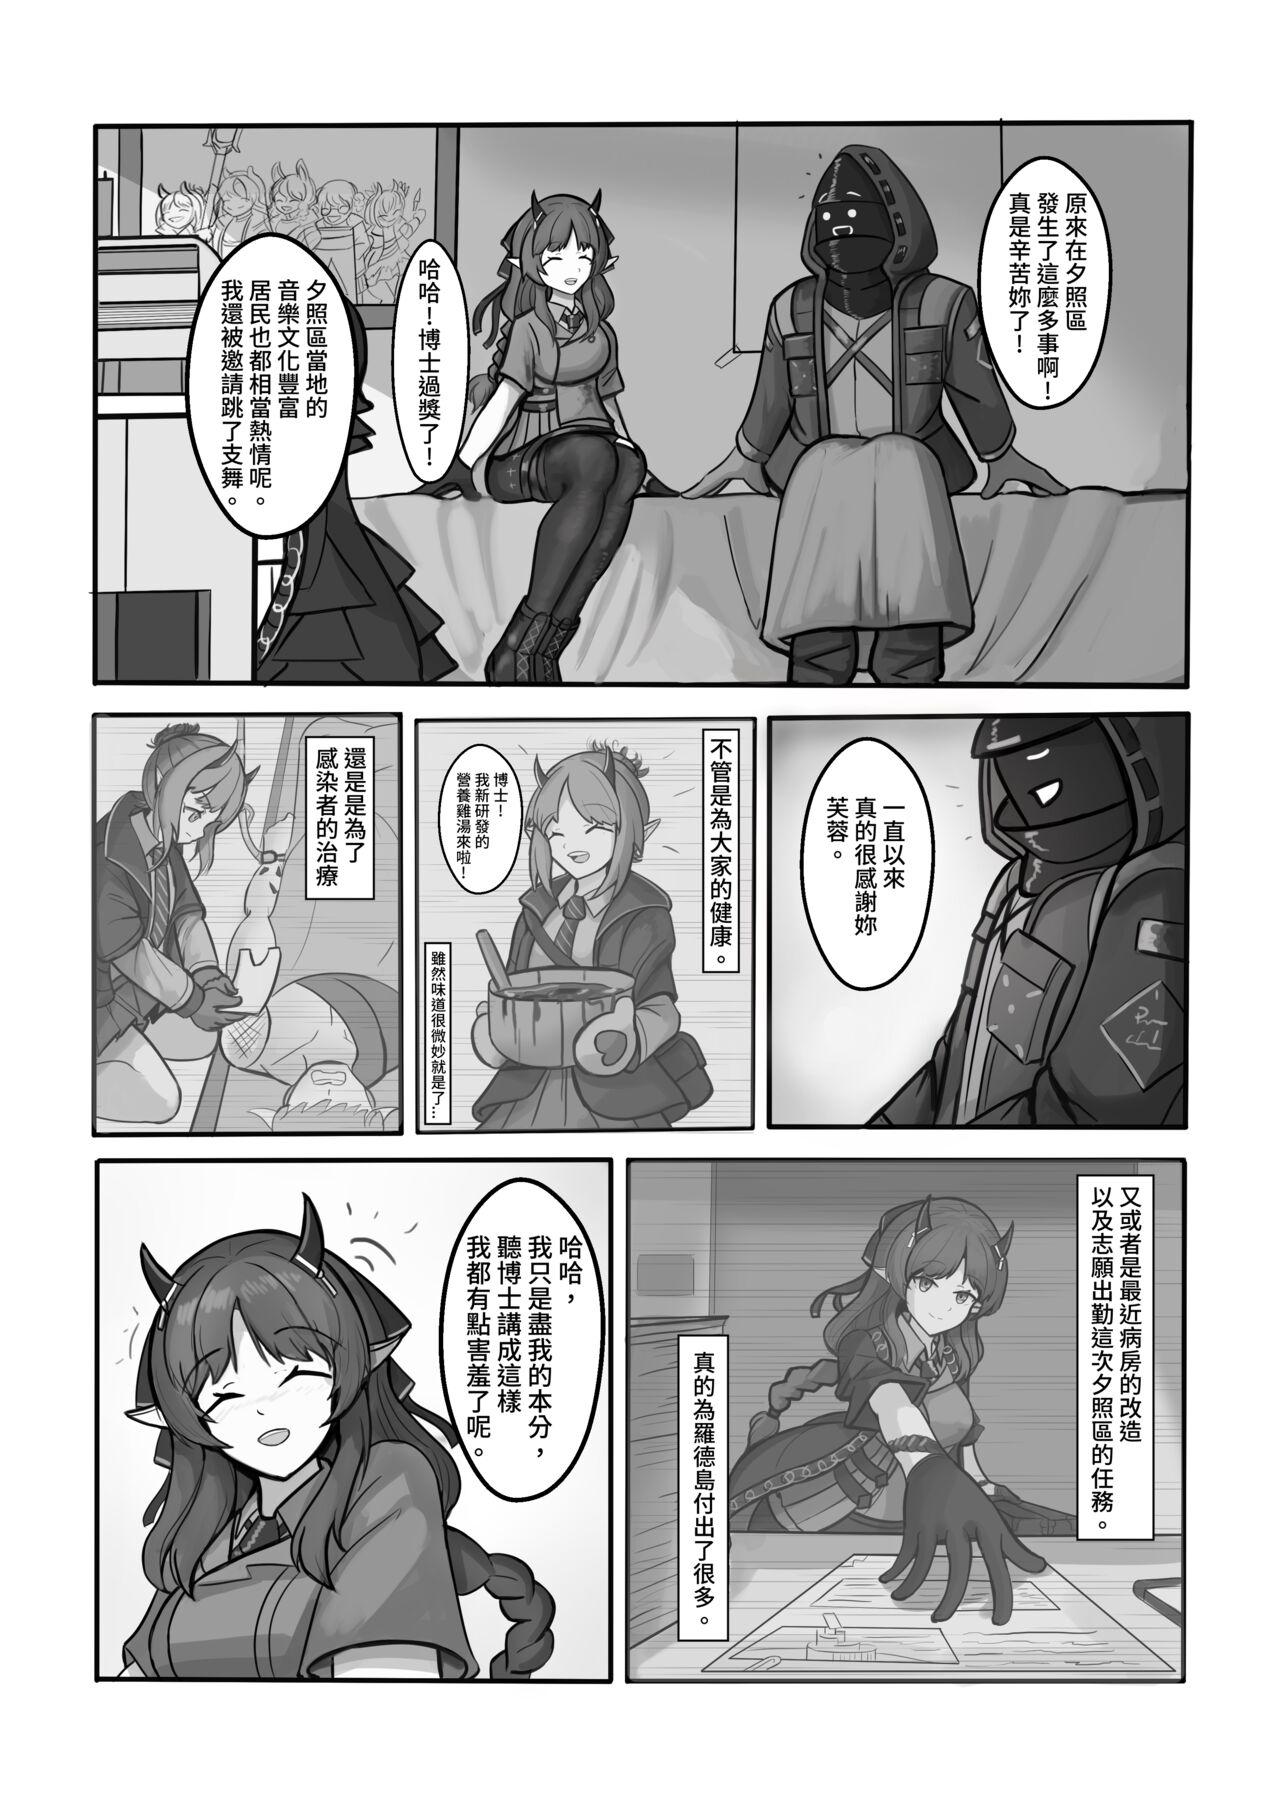 Mamada AfterGlow - Arknights Orgame - Page 11